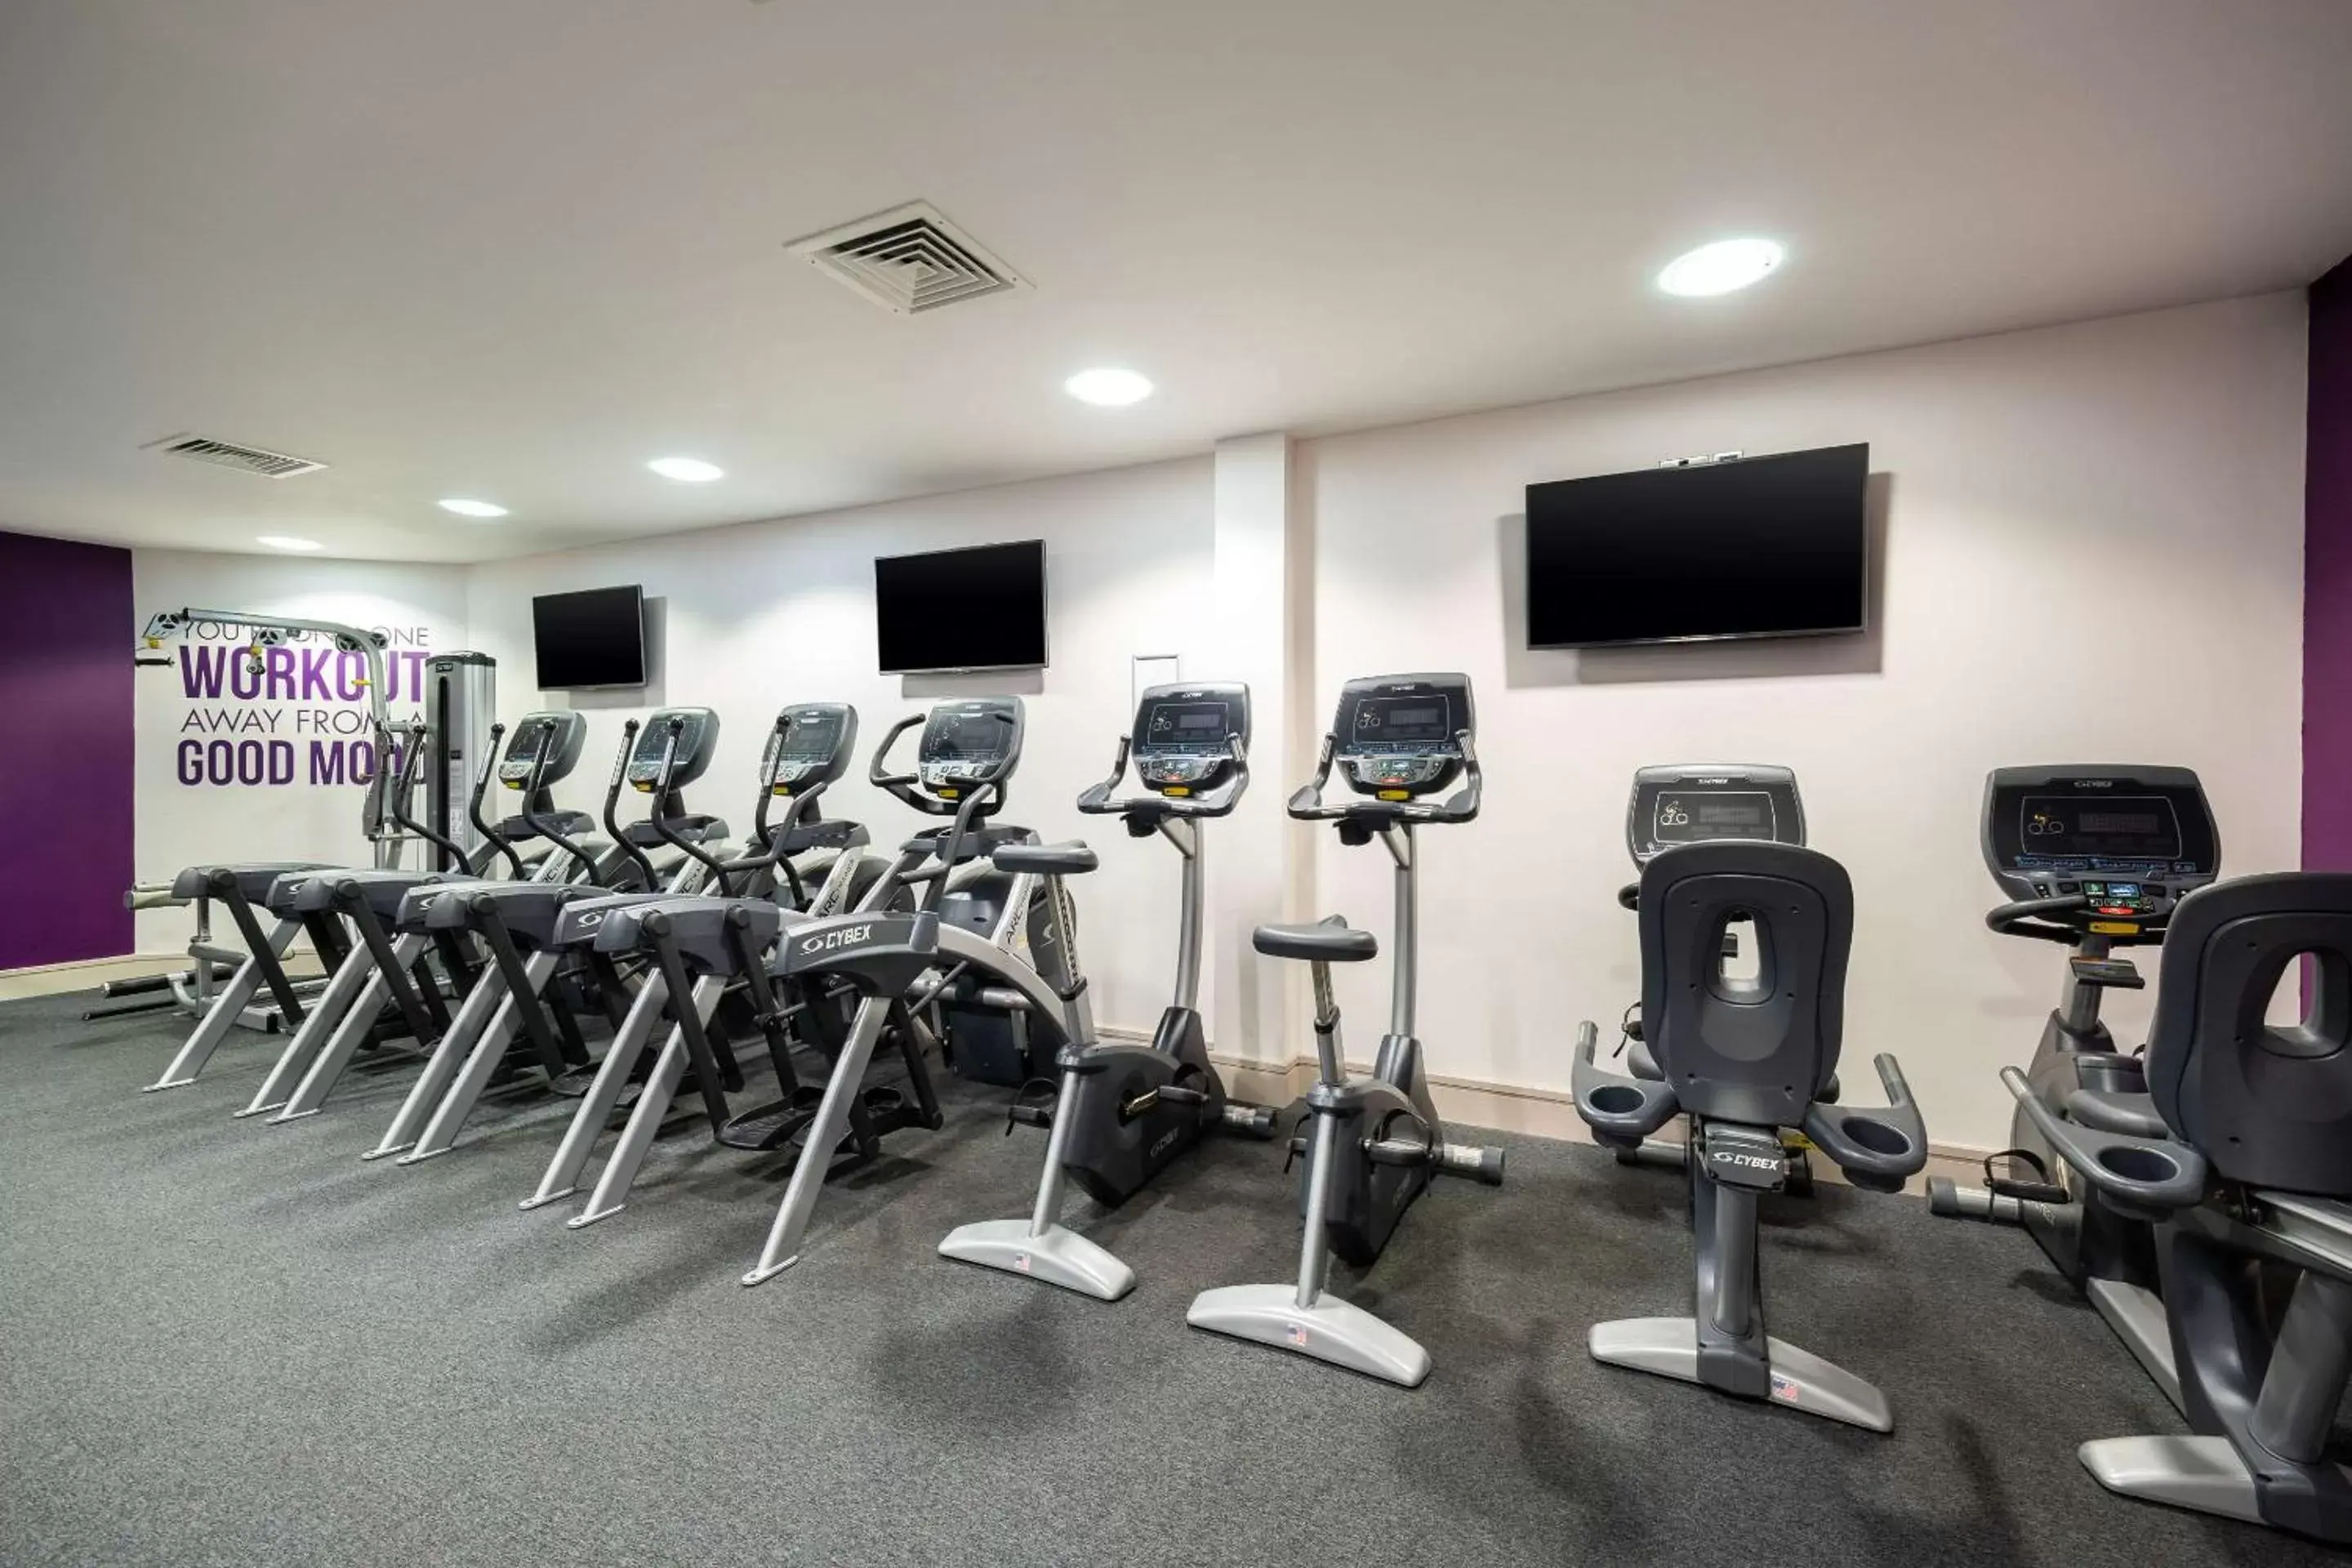 Fitness centre/facilities, Fitness Center/Facilities in Clarion Hotel Newcastle South